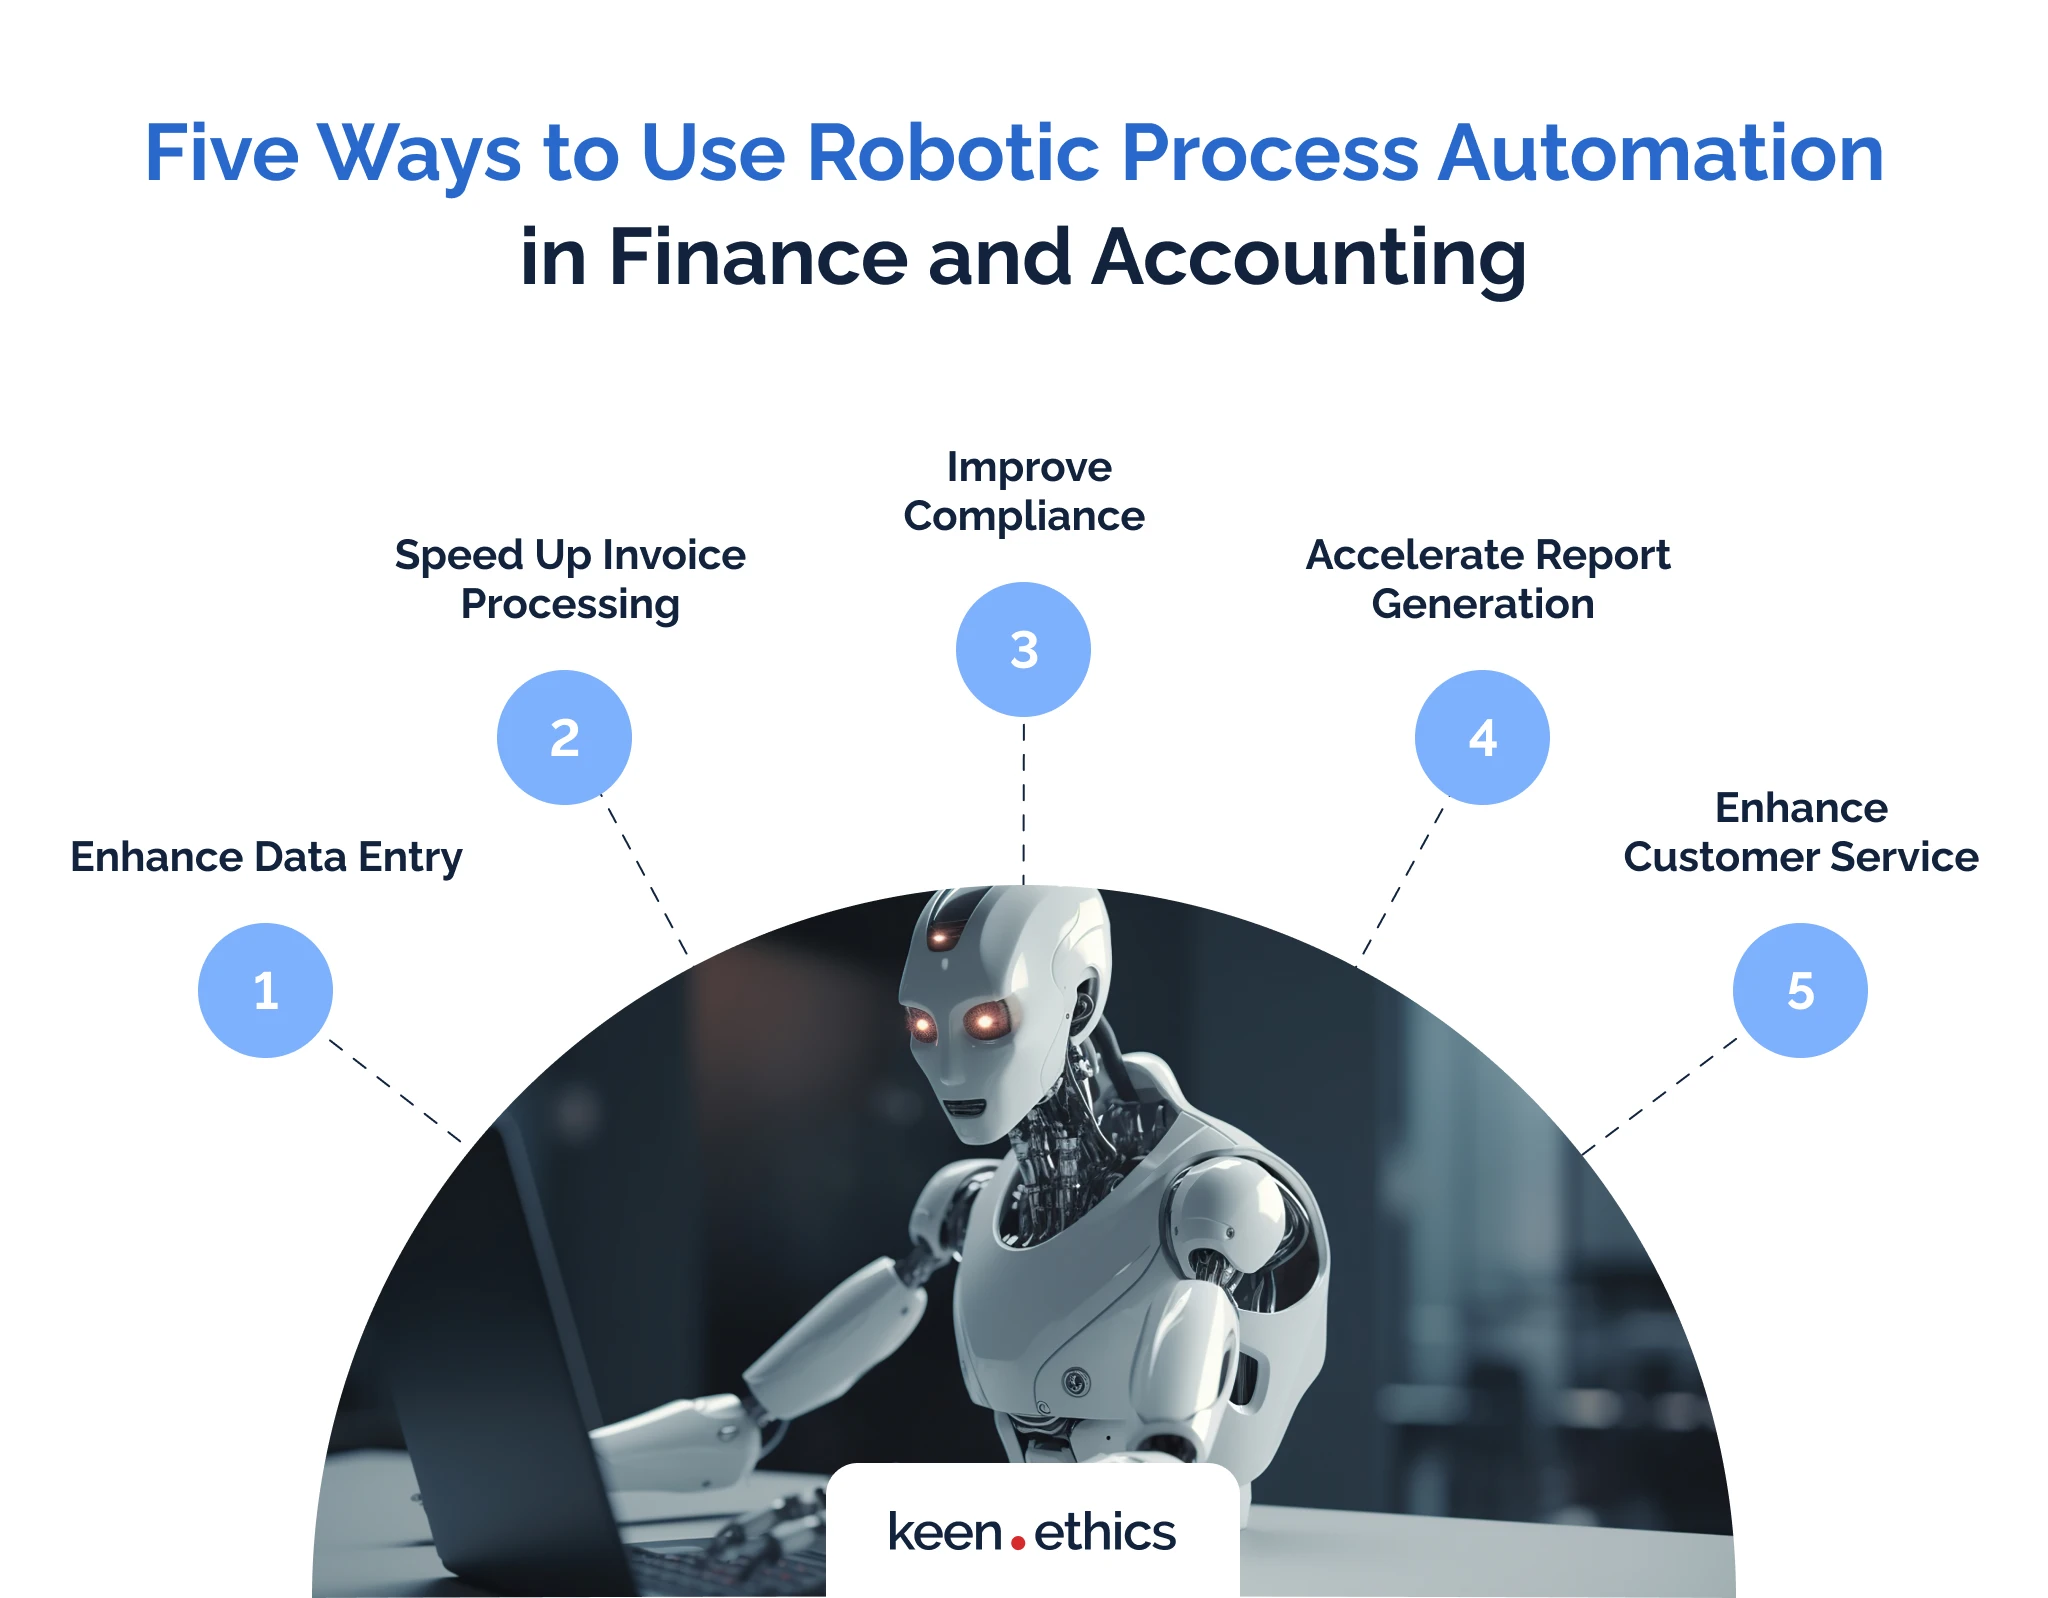 Five ways to use RPA in finance and accounting